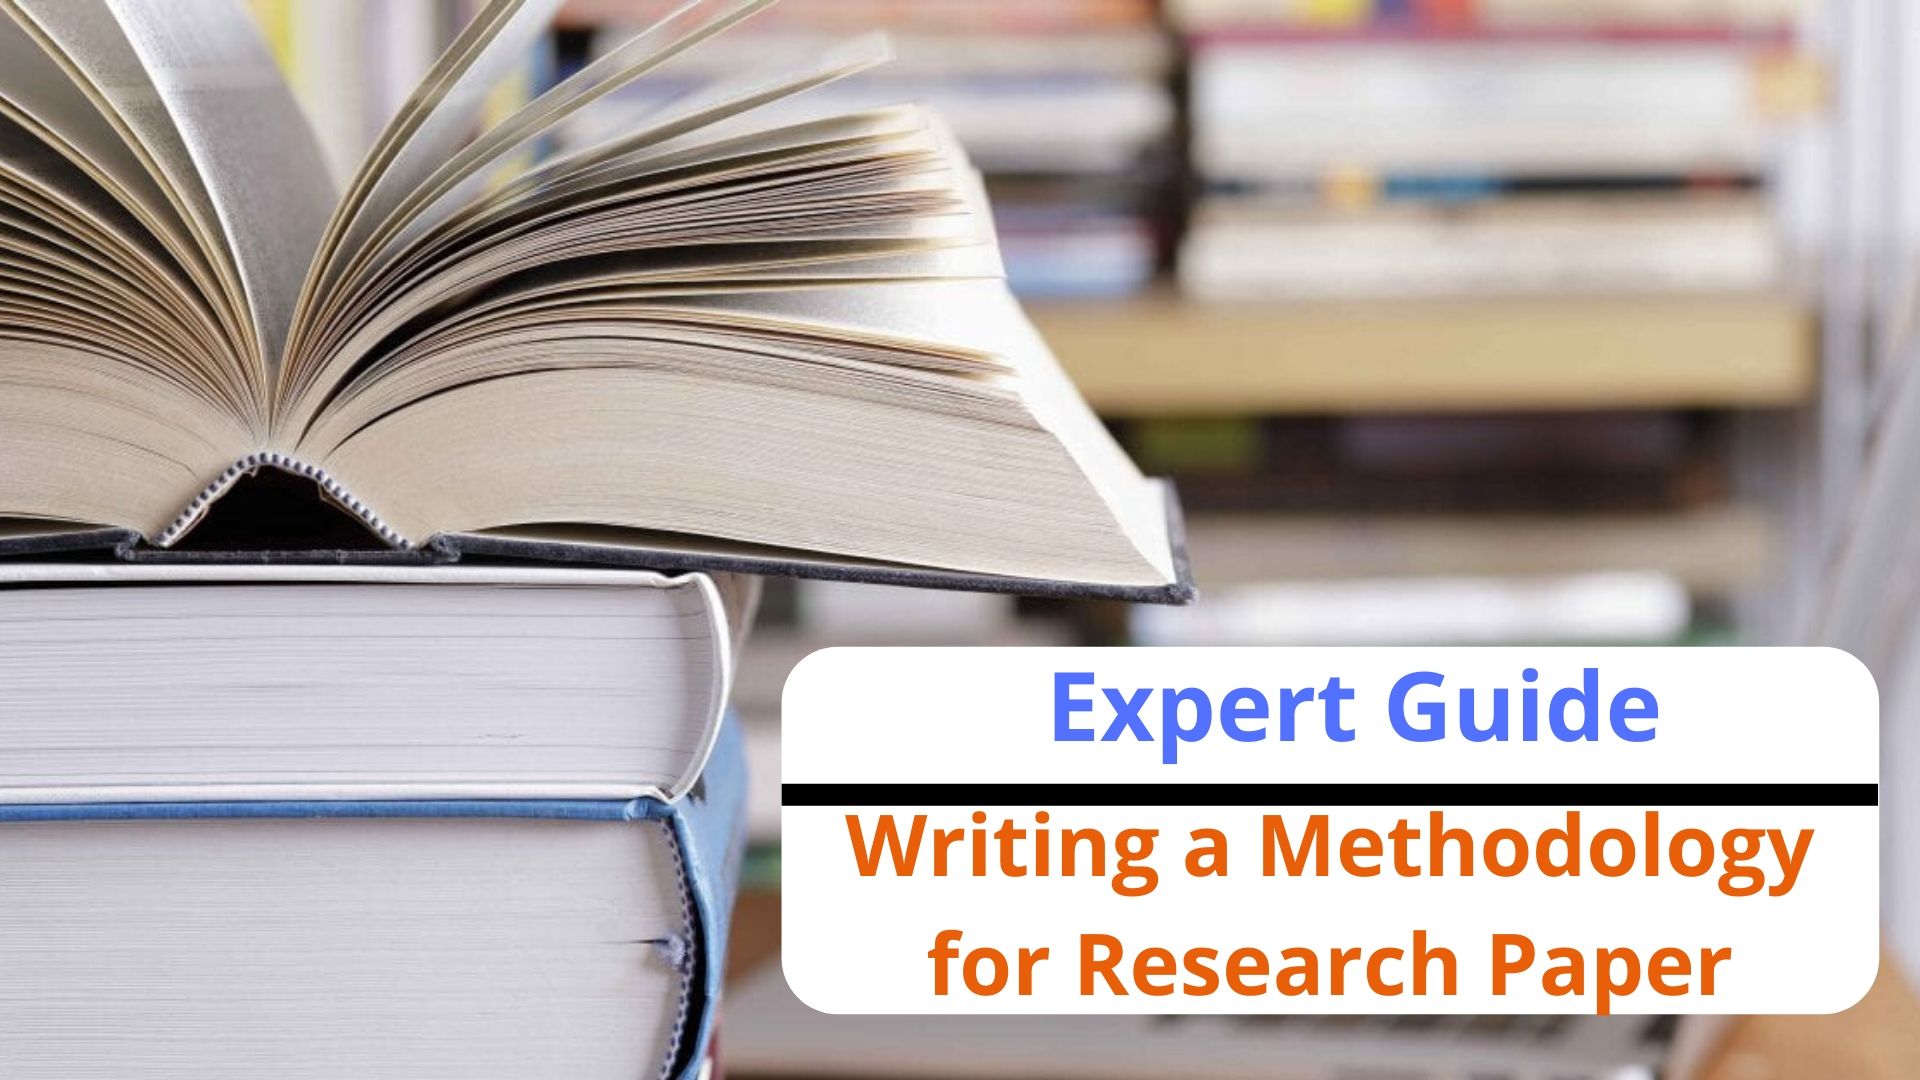 Writing a Methodology for Research Paper - Expert Guide